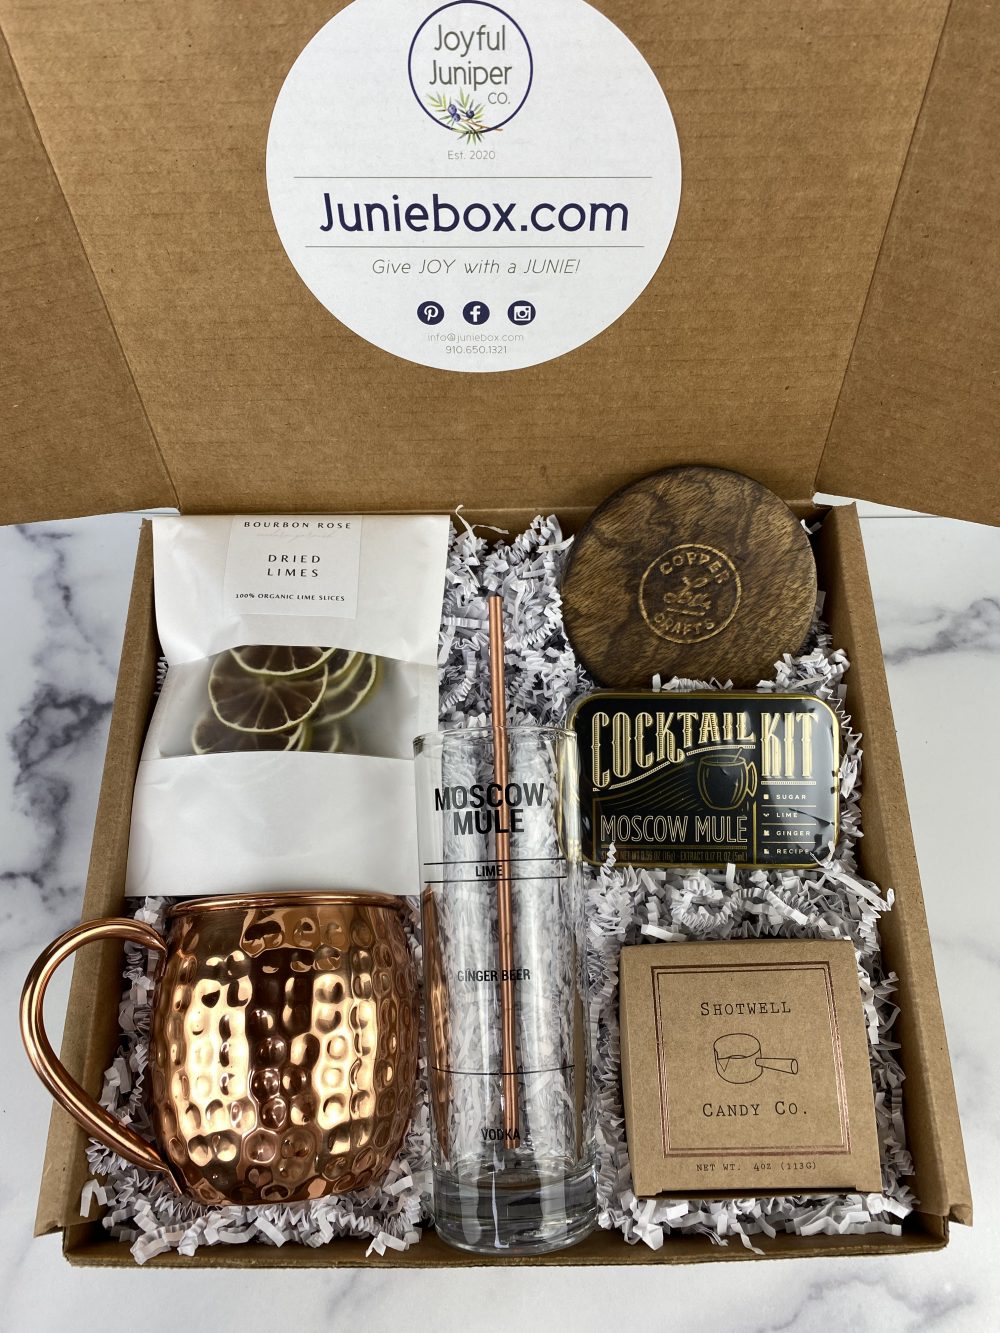 The Moscow Mule Box